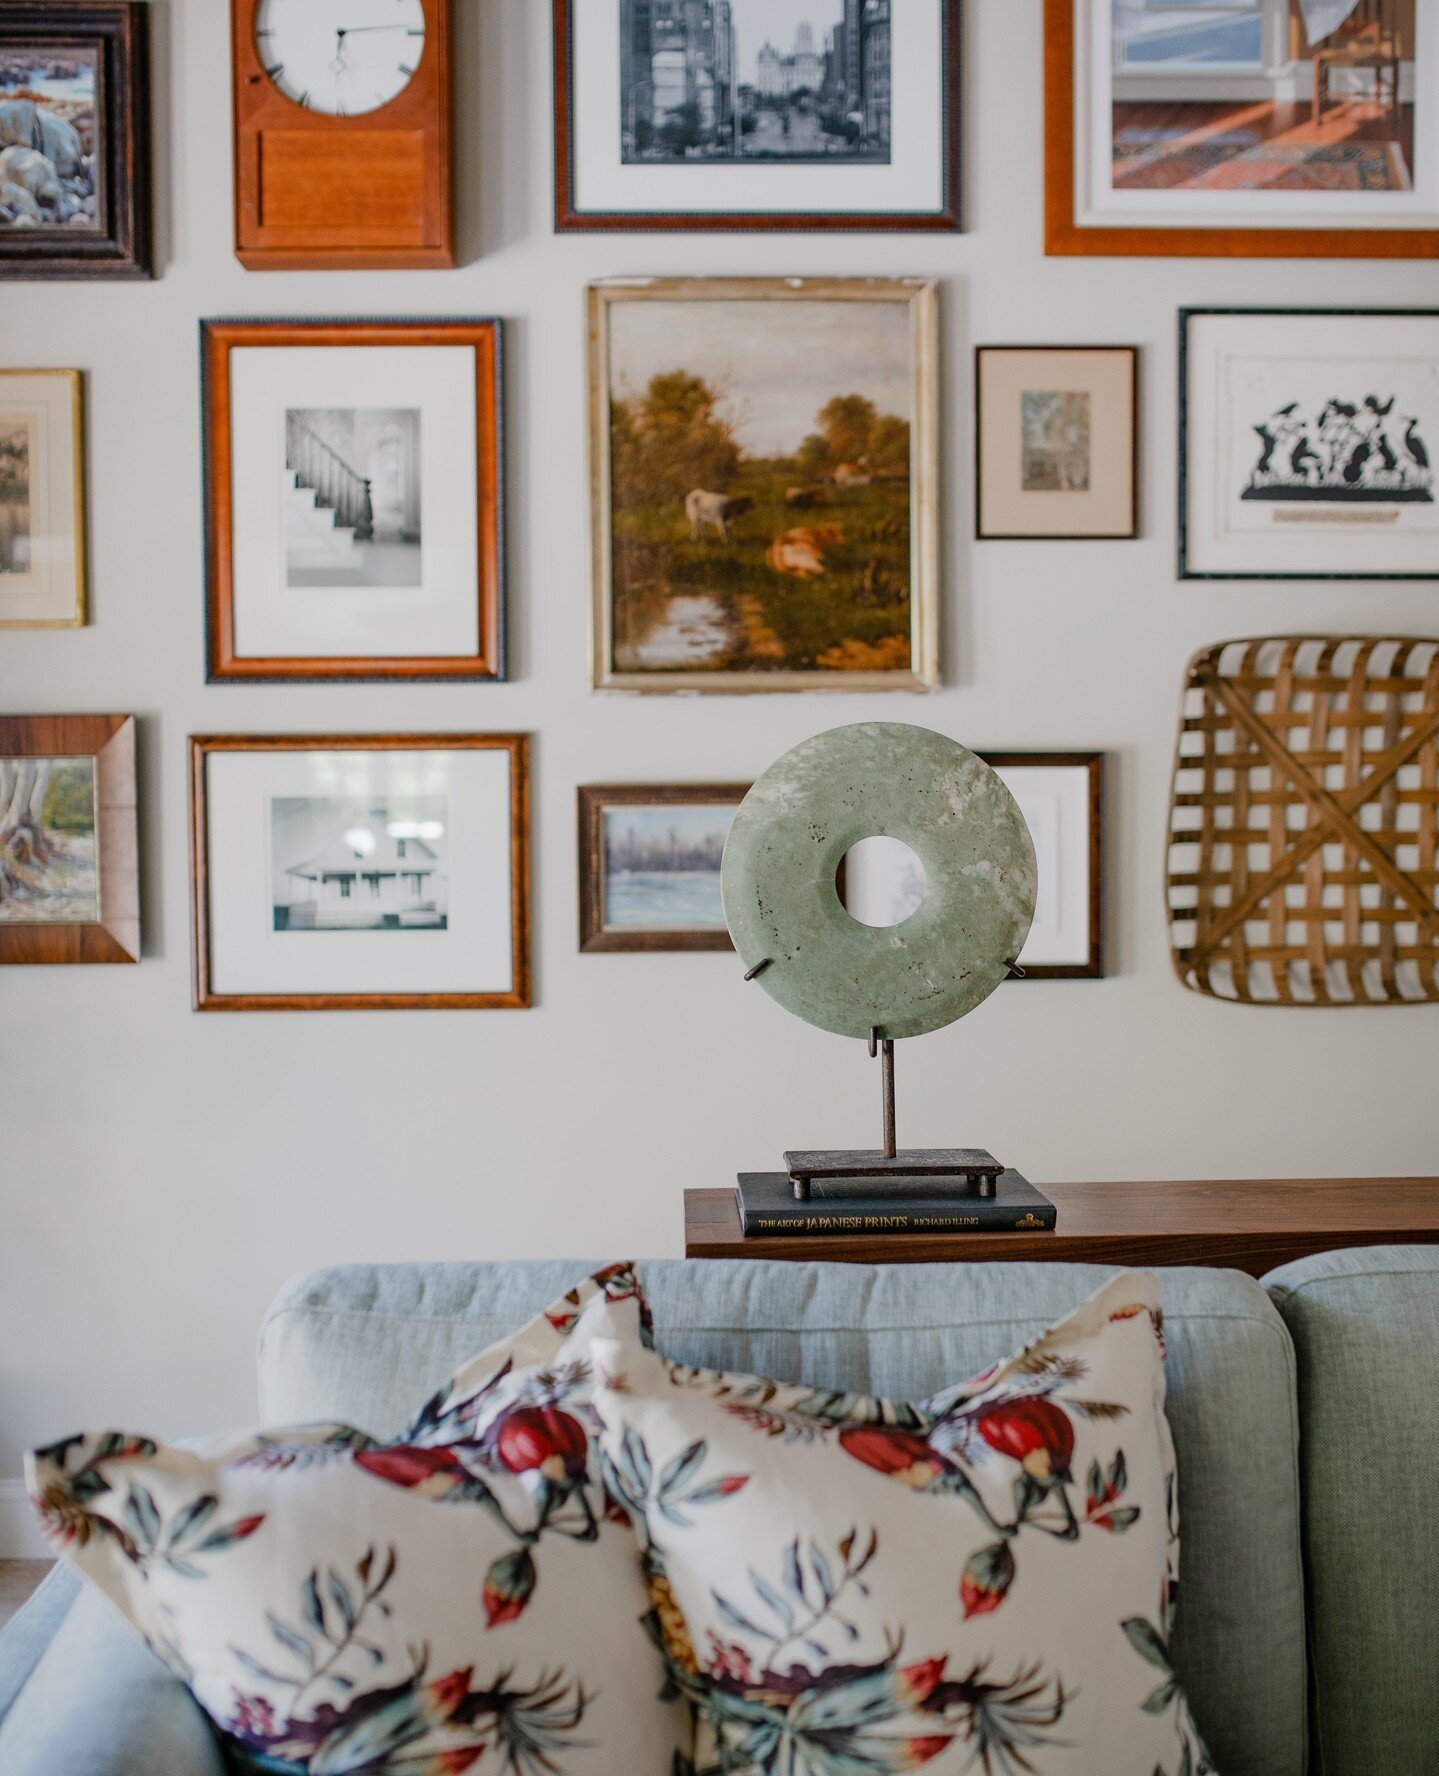 This gallery wall is the perfect example of how we work with clients existing collections of all kinds and integrate them into the design. The client here was sure we would want to trash some of these treasures, but no! Just look how artfully the col